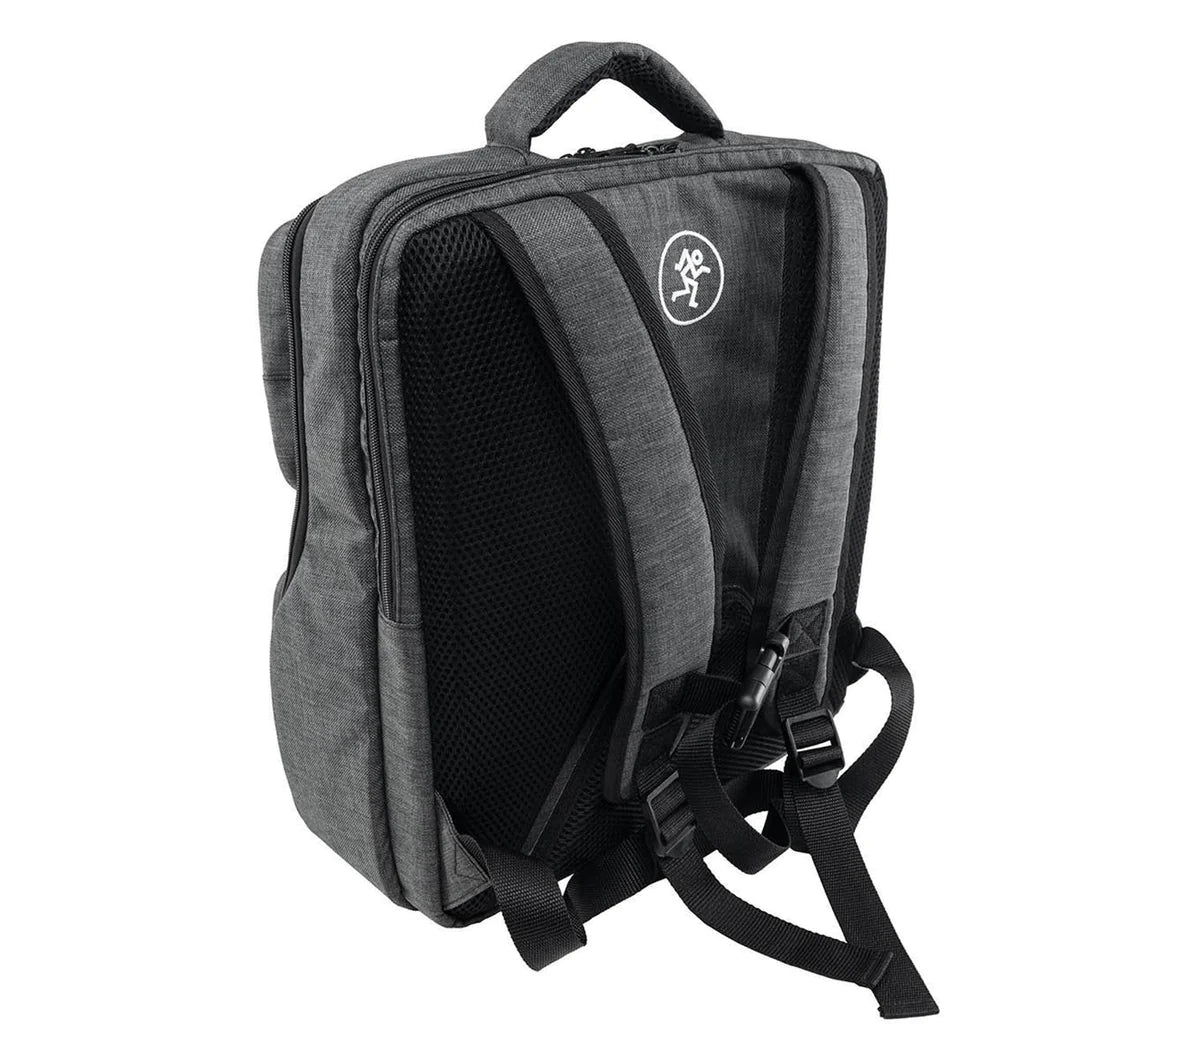 Mackie Custom Carry Bag/Backpack for Mixer and Accessories